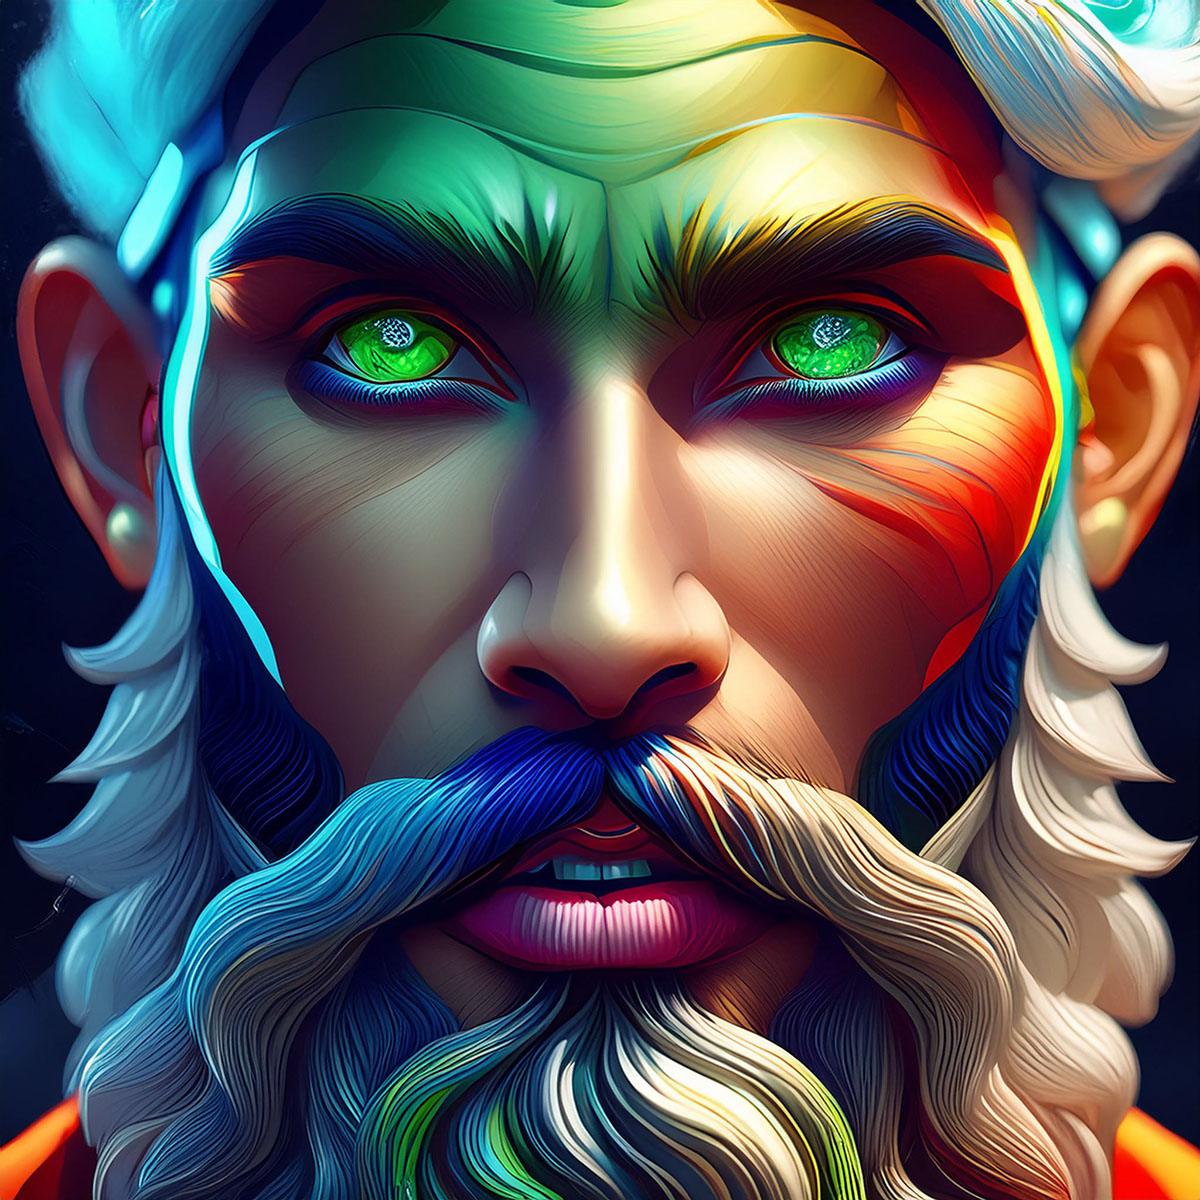 Man with green eyes and a big beard rendition image